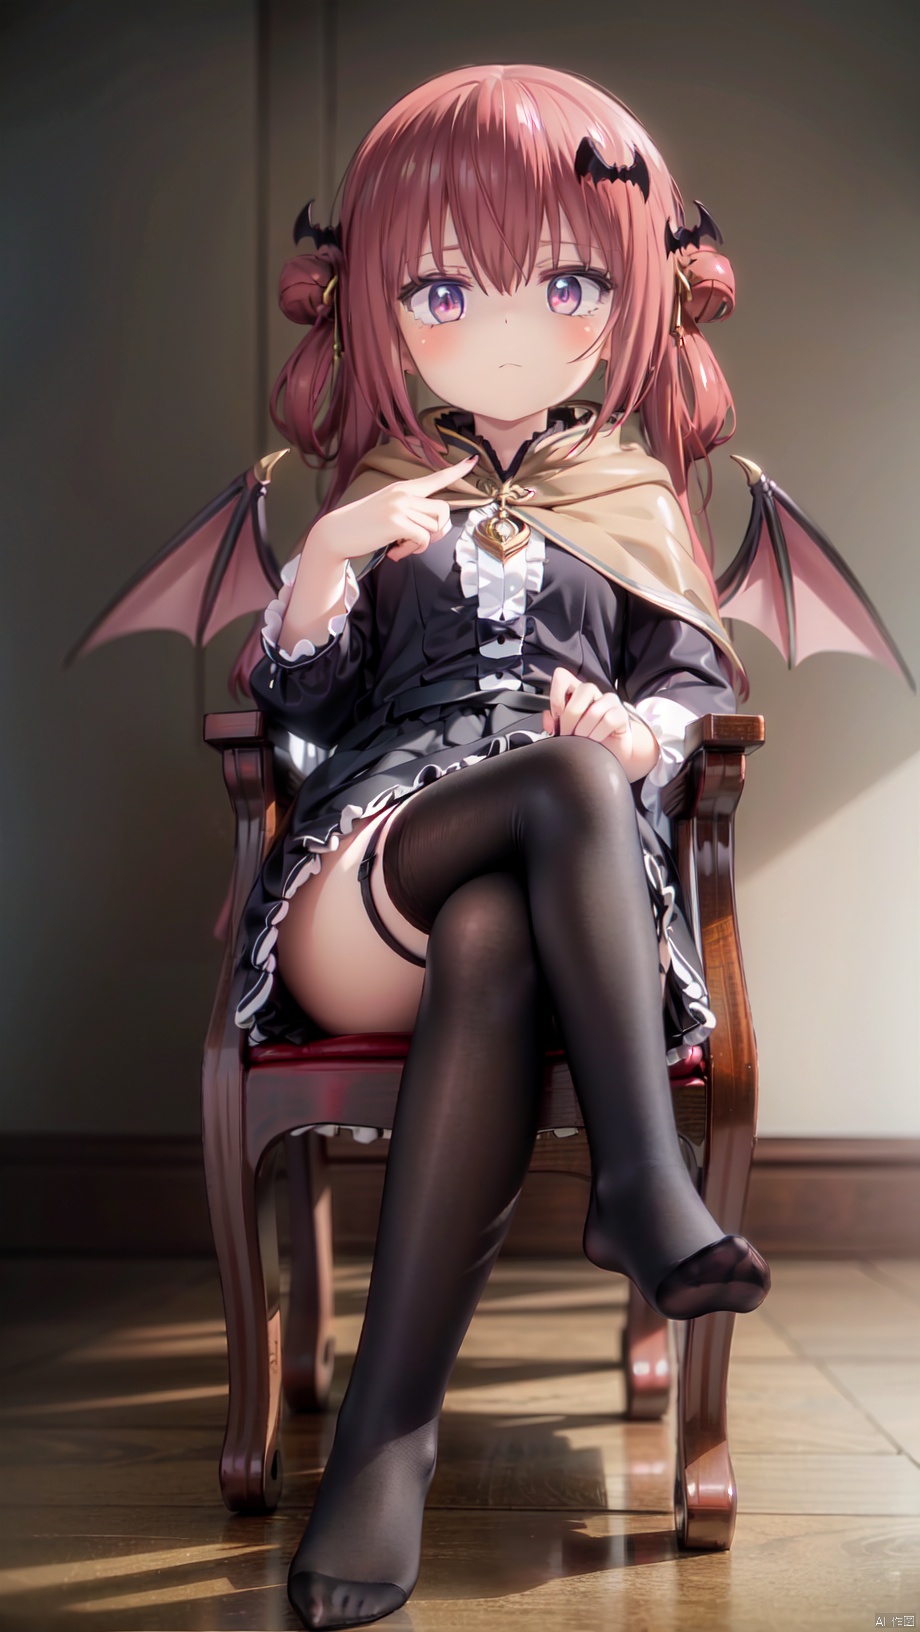 Satanichia Kurumizawa Mcdowell,gothic lolita,loli,beautiful detailed girl,narrow waist,very small breasts,Glowing skin,Delicate cute face,cape,princess dress,torn clothes,fine fabric emphasis,ornate clothes,red eyes eyes,beautiful detailed eyes,glowing eyes,(half-closed eyes,raised eyebrow),((red hair)),((long hair,bat wings hair ornament)),Glowing hair,Extremely delicate hair,Thin leg,white legwear garter,no shoes,beautiful detailed fingers,Slender fingers,steepled fingers,Shiny nails,(sitting on throne,crossed legs),smug(expression),Upturned corners of the mouth,looking down at viewer,beautiful detailed mouth,looking at viewer,bat(ornament),palace,ornate throne,hyper realistic,magic,8k,incredible quality,best quality,masterpiece,highly detailed,extremely detailed CG,cinematic lighting,backlighting,full body,high definition,detail enhancement,(perfect hands, perfect anatomy),detail enhancement